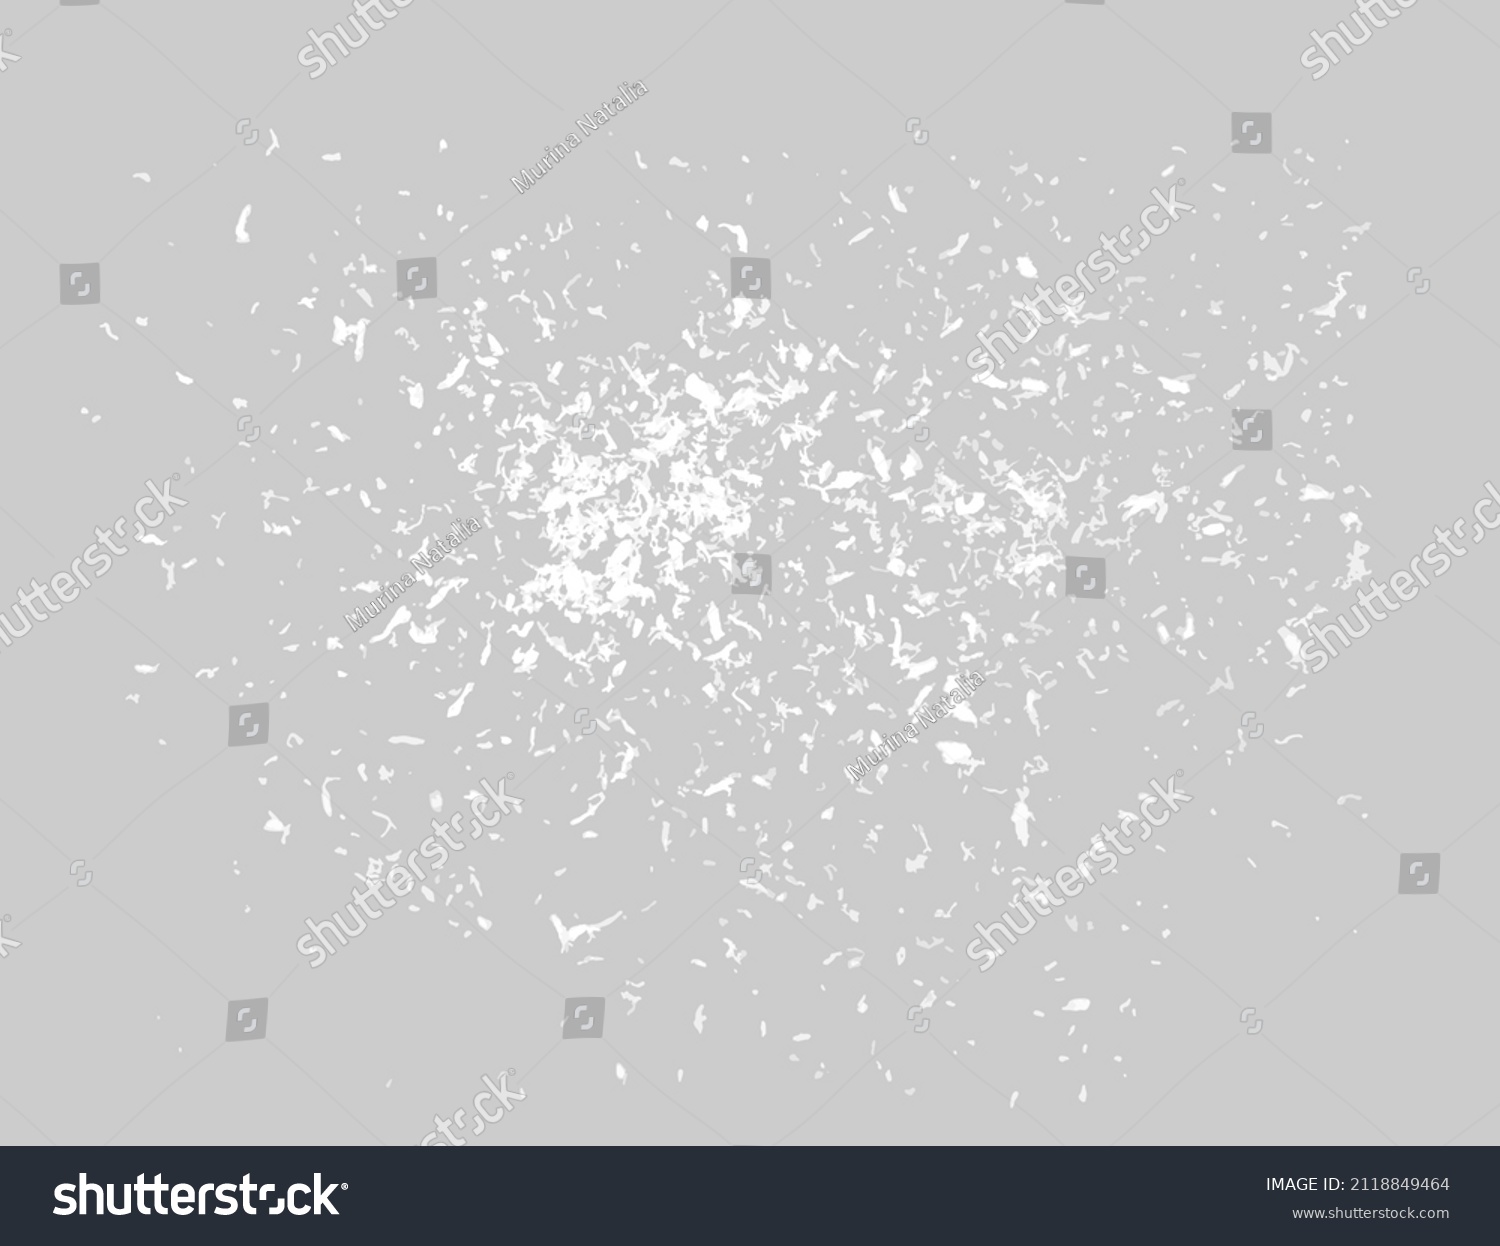 SVG of Scattered coconut flakes isolated on gray background. Realistic vector illustration. Top view. svg